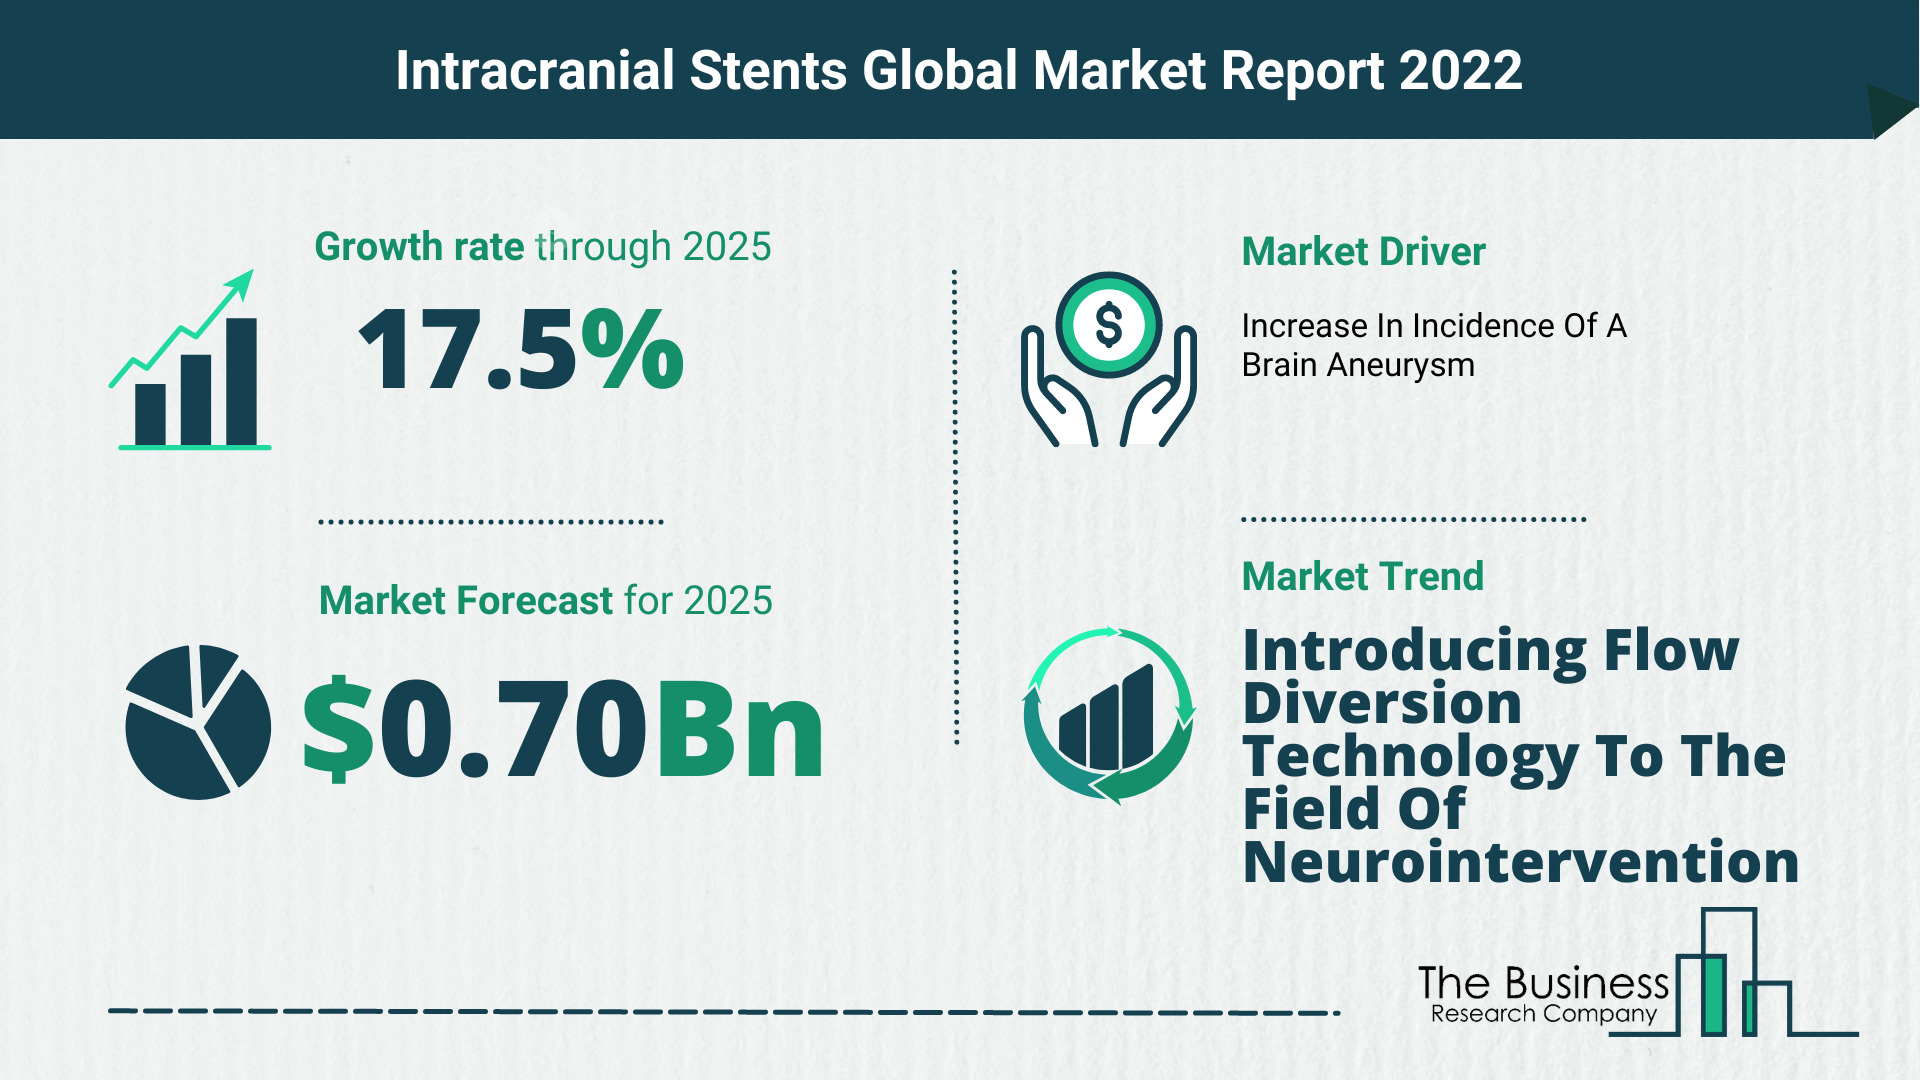 Global Intracranial Stents Market 2022 – Market Opportunities And Strategies